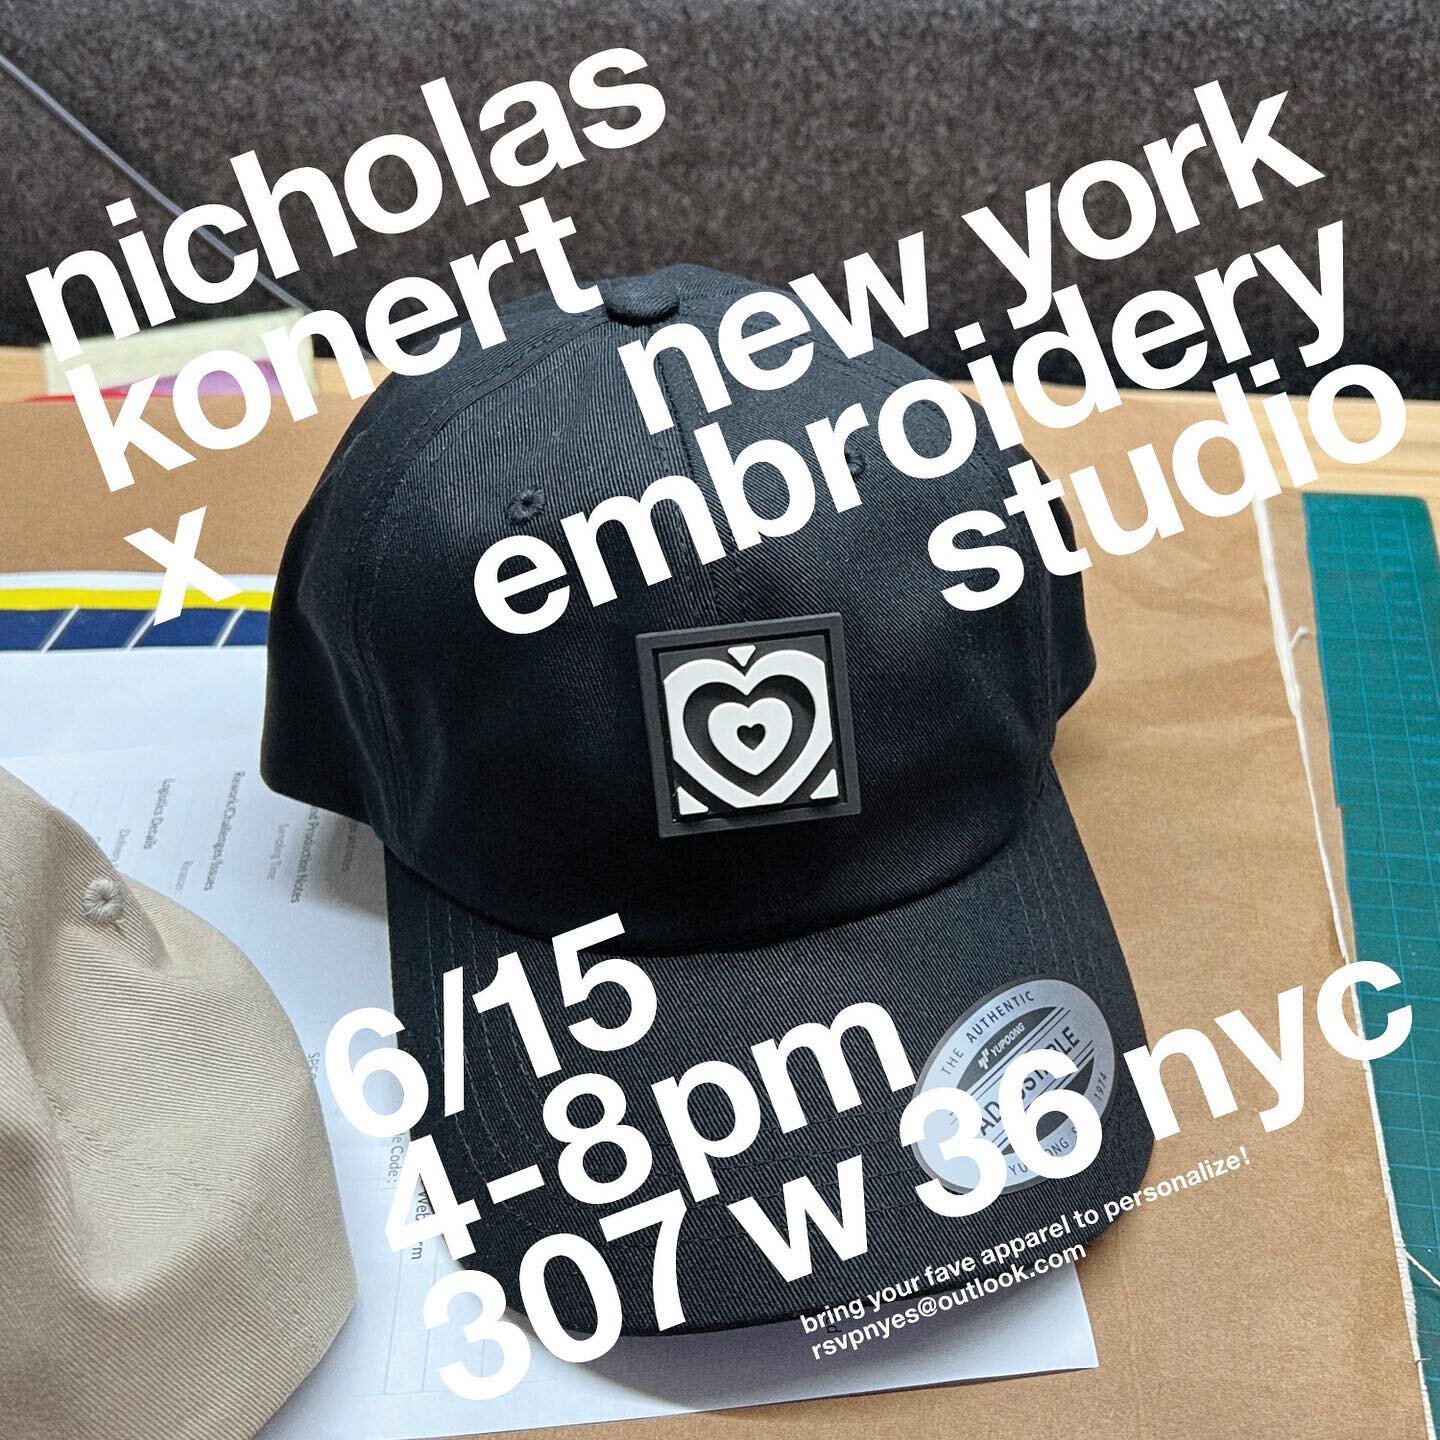 Hey NYC friends! See you this Wednesday, June 15th from 4-8pm. I&rsquo;m hosting a personalization event at NY Embroidery in the Garment District. I&rsquo;d love to invite and see you if you&rsquo;re available. Bring your fave apparel, and we can per